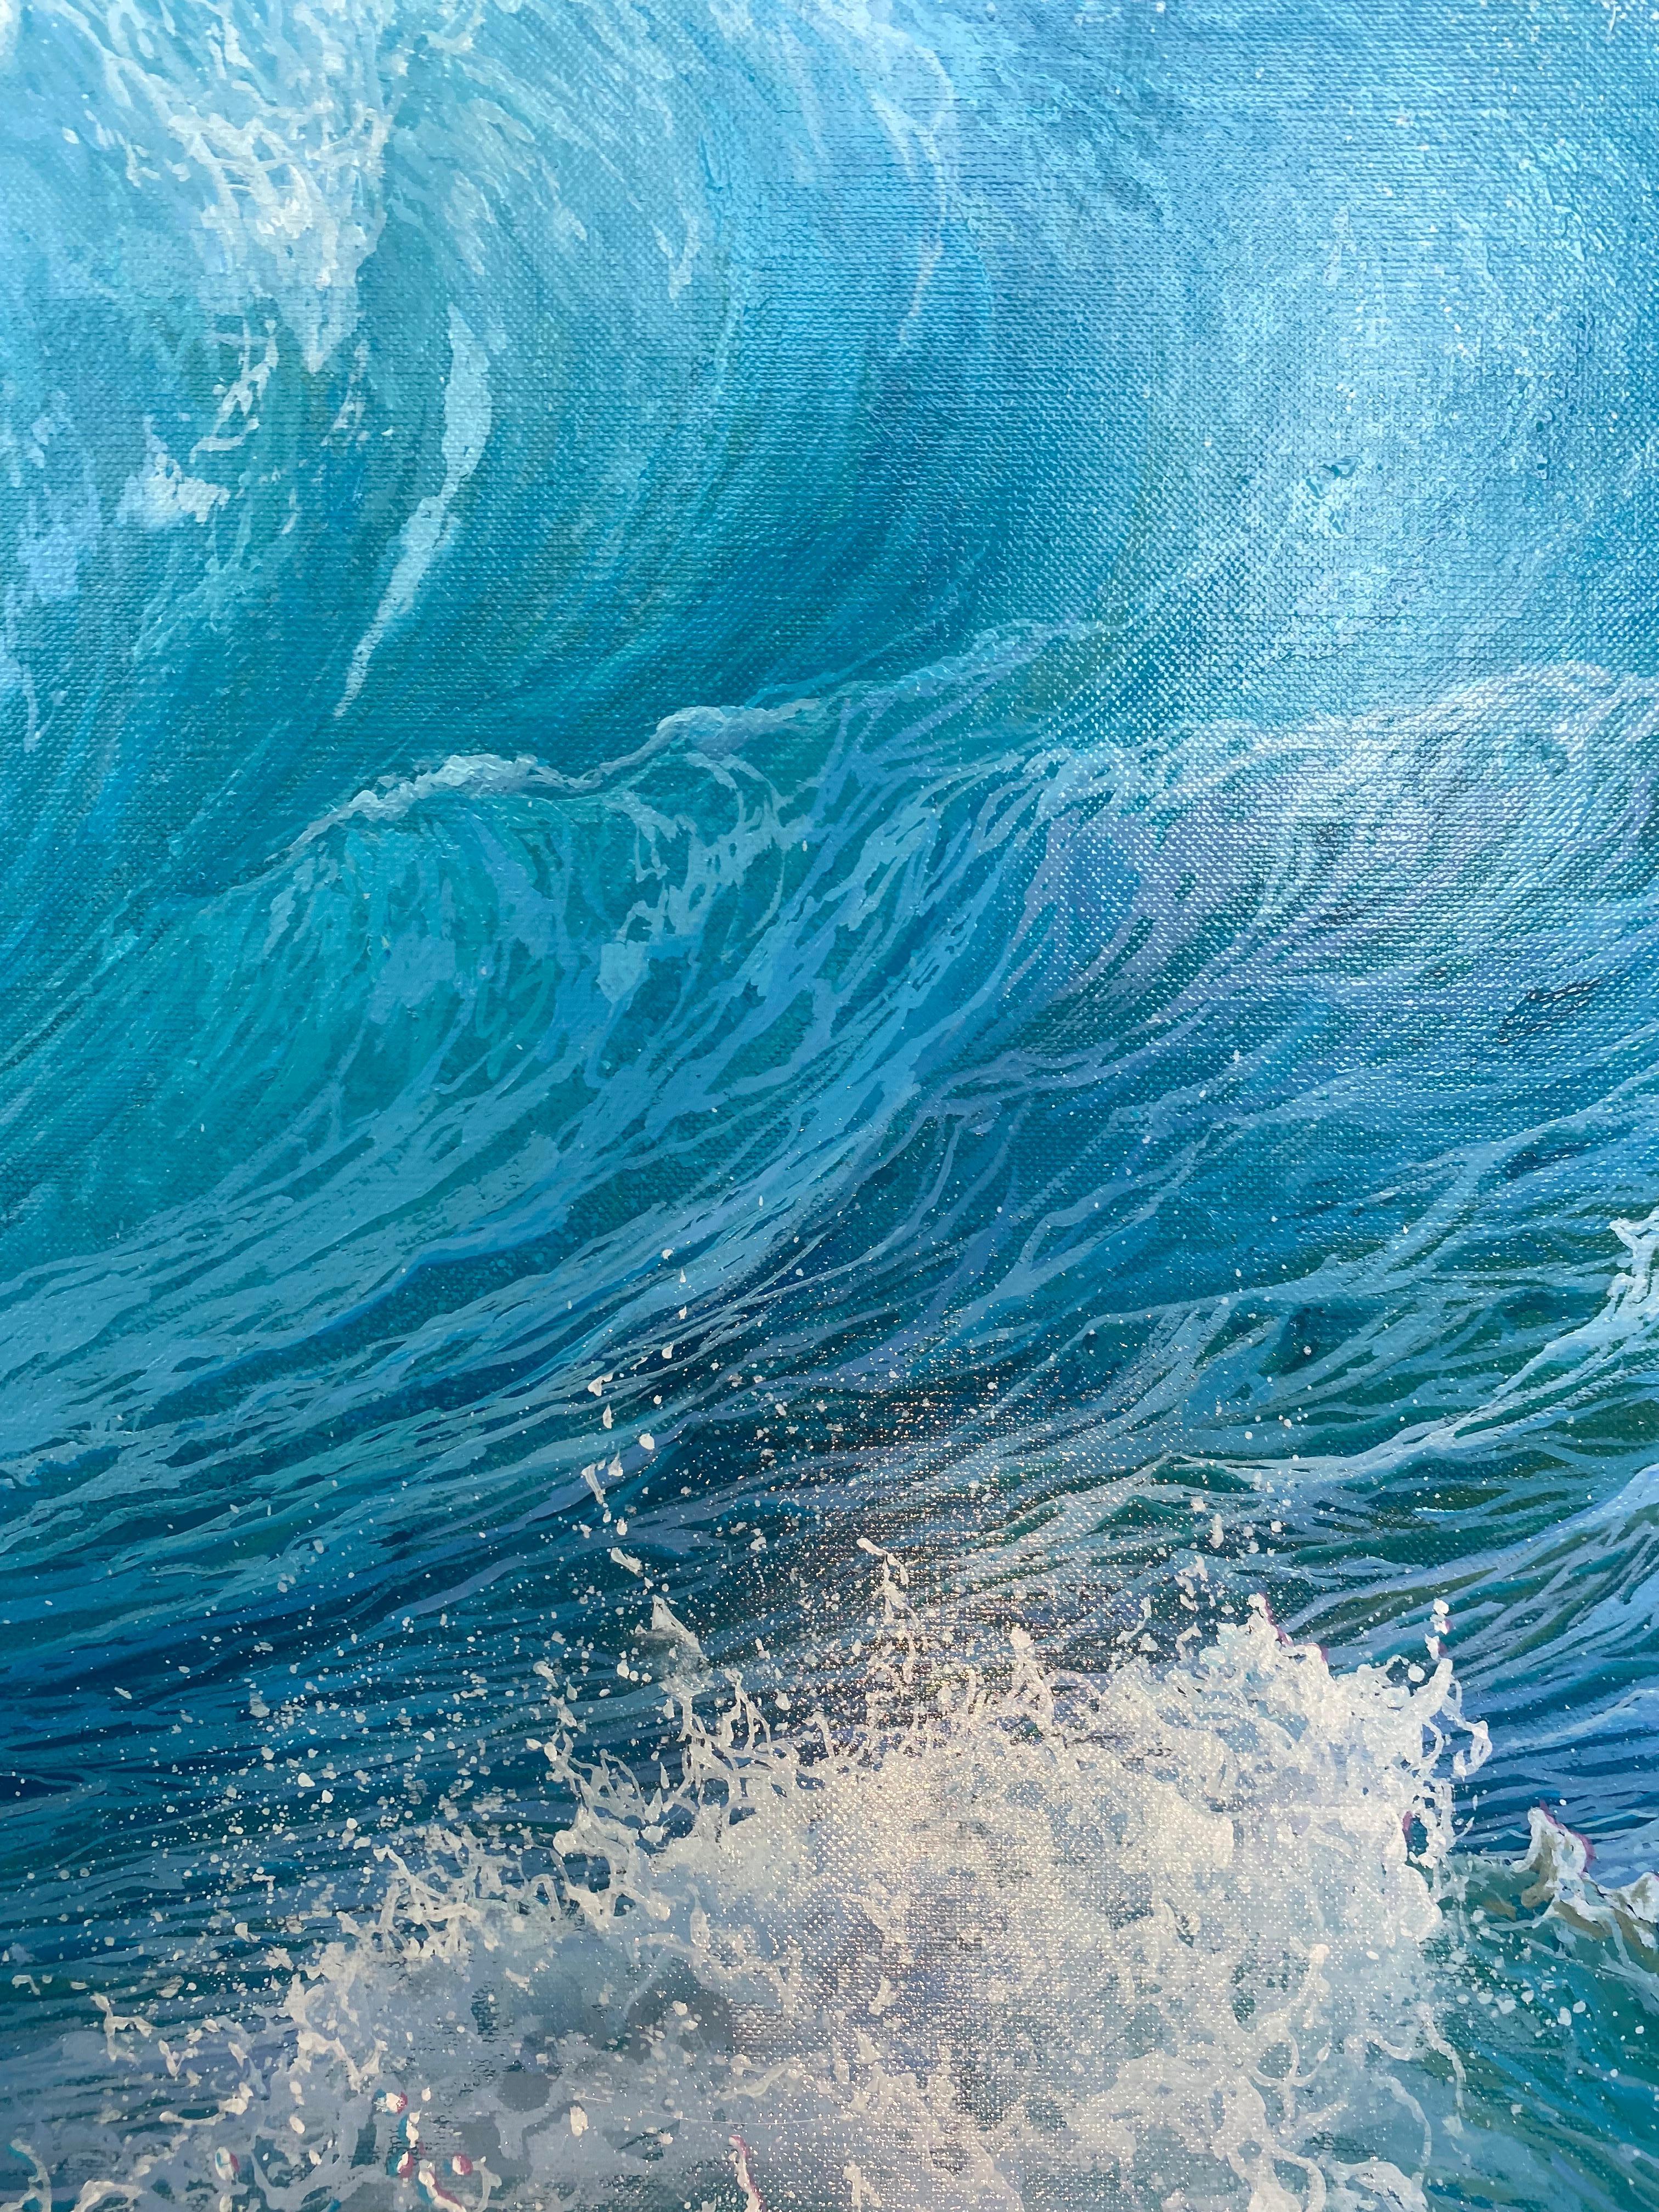 'Roaring seas' Contemporary powerful blue seascape painting of a crashing wave - Photorealist Painting by Marc Esteve